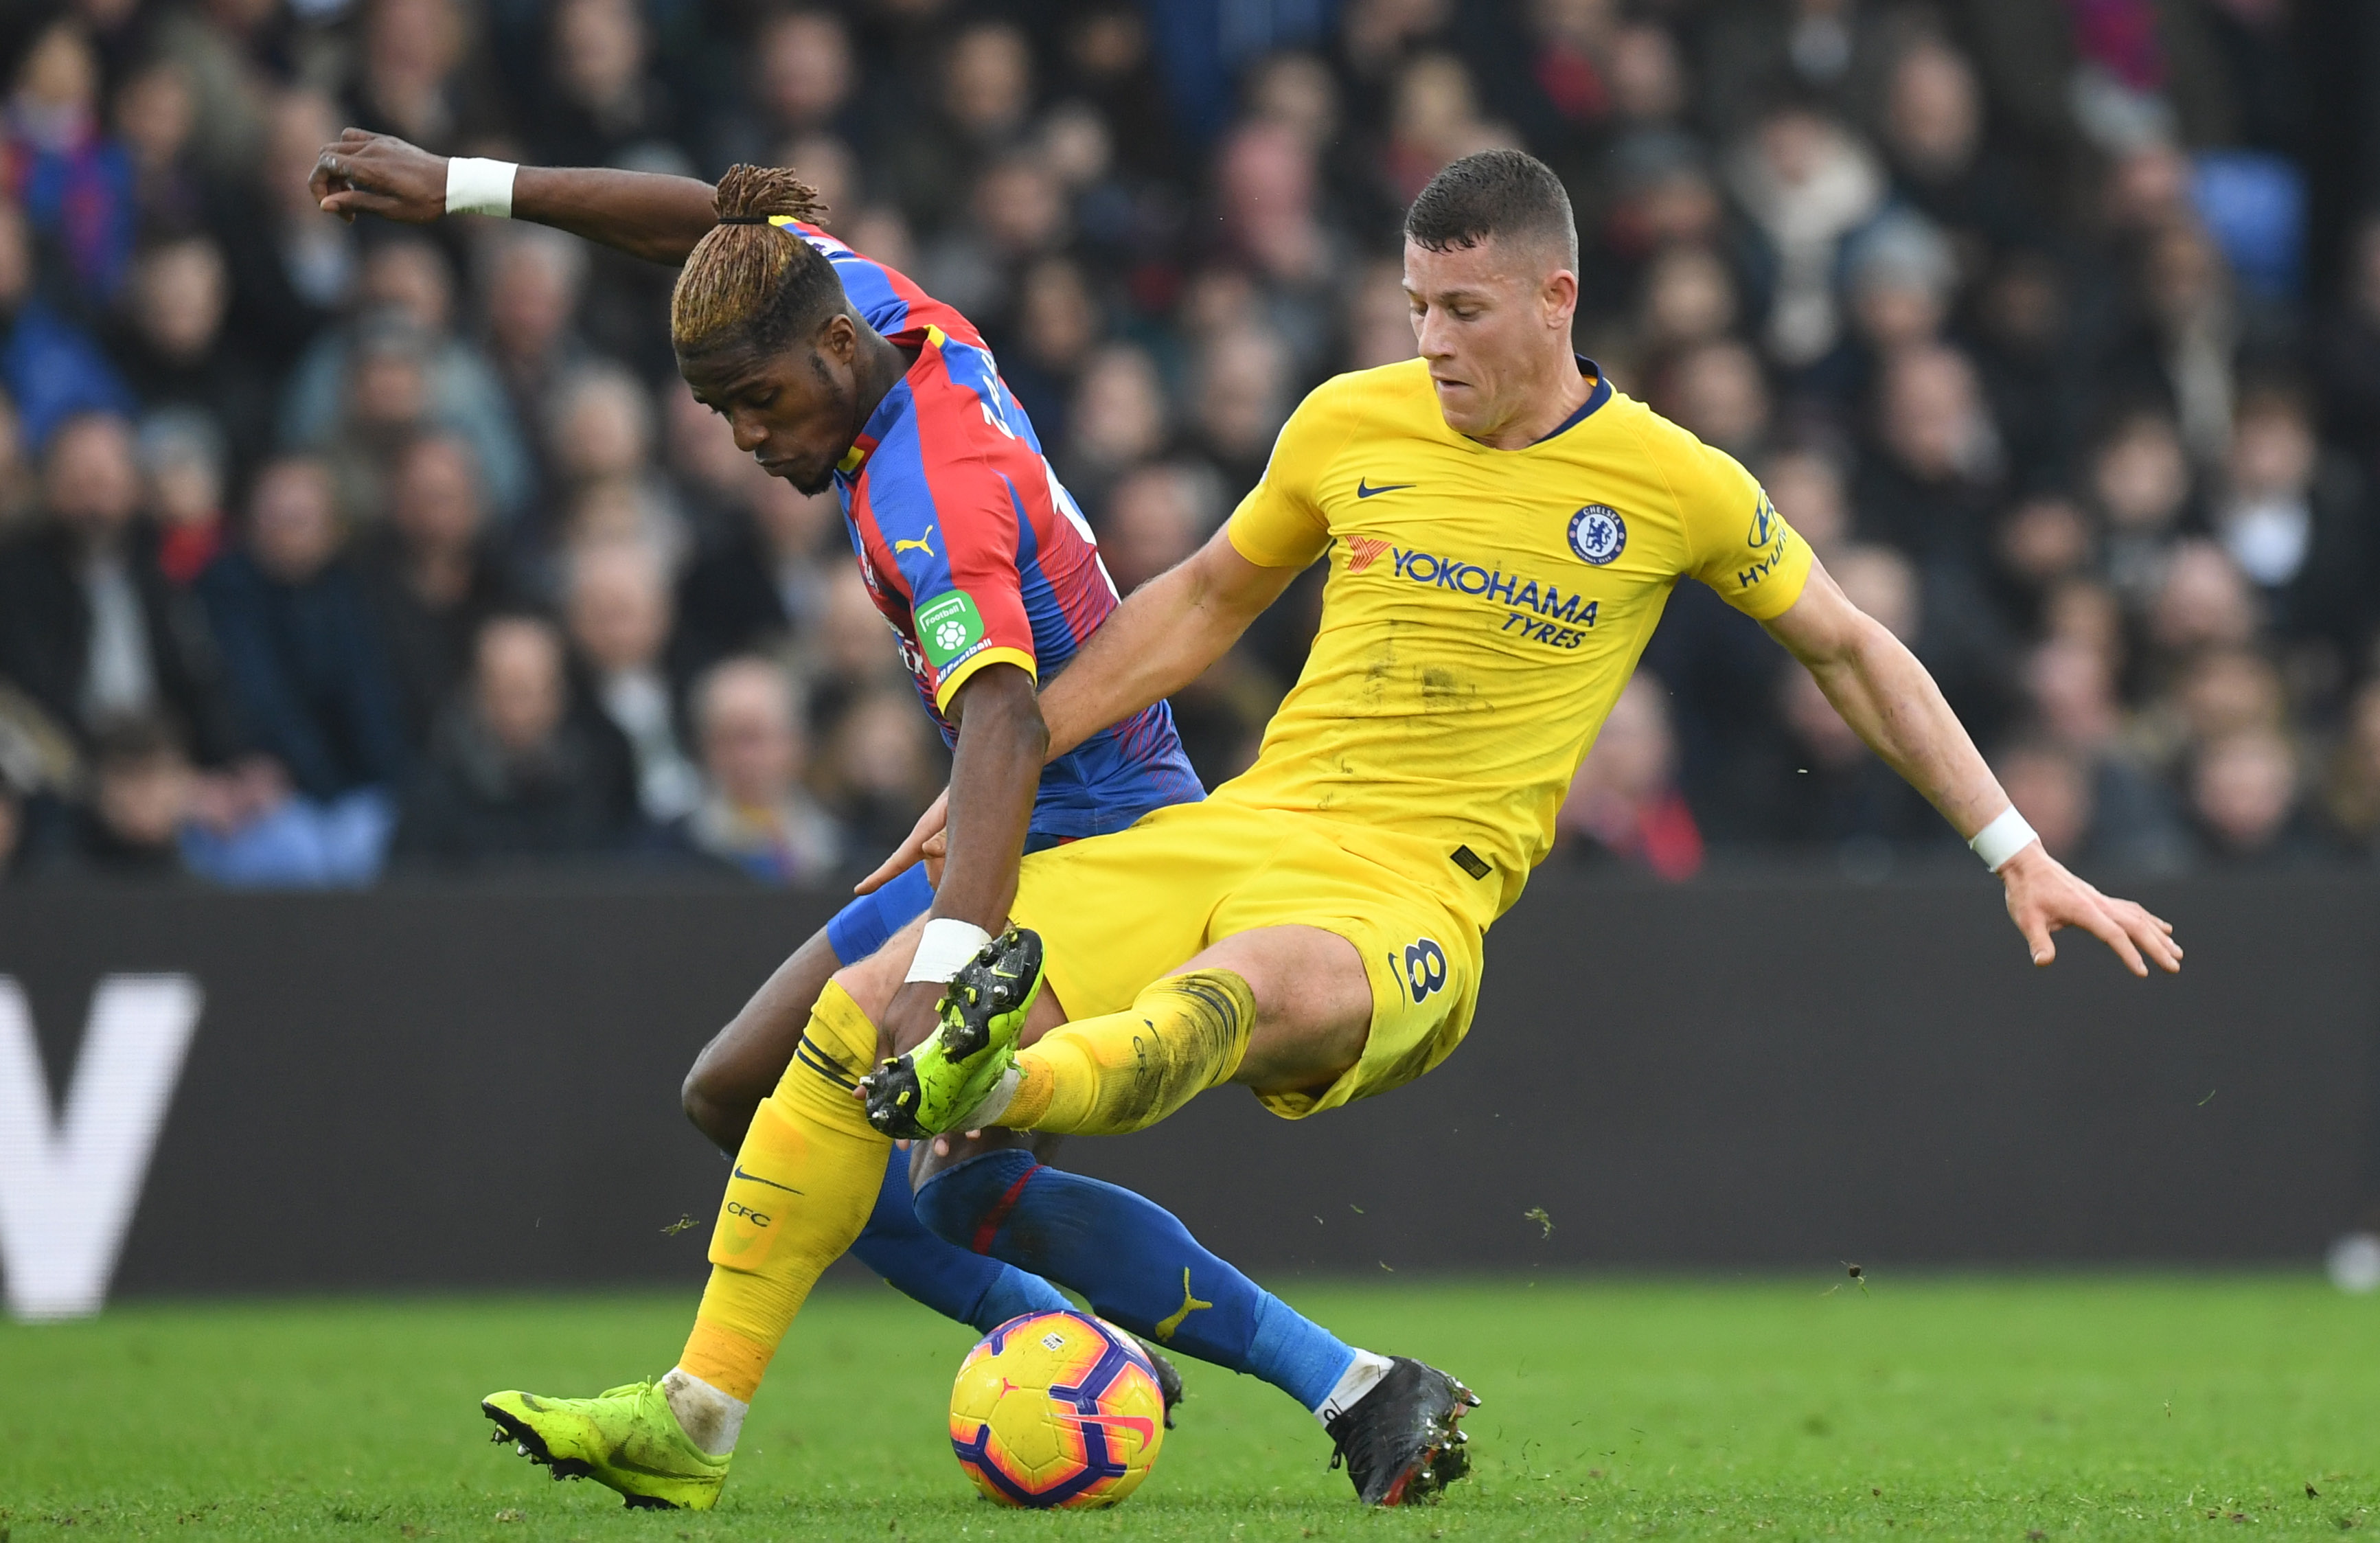 epa07254072 Crystal Palace's Wilfred Zaha (L) and Chelsea's Ross Barkley (R) in action during the English Premier League soccer match between Crystal Palace and Chelsea FC at Selhurst Park in London, Britain, 30 December 2018.  EPA/FACUNDO ARRIZABALAGA EDITORIAL USE ONLY. No use with unauthorized audio, video, data, fixture lists, club/league logos or 'live' services. Online in-match use limited to 120 images, no video emulation. No use in betting, games or single club/league/player publications.